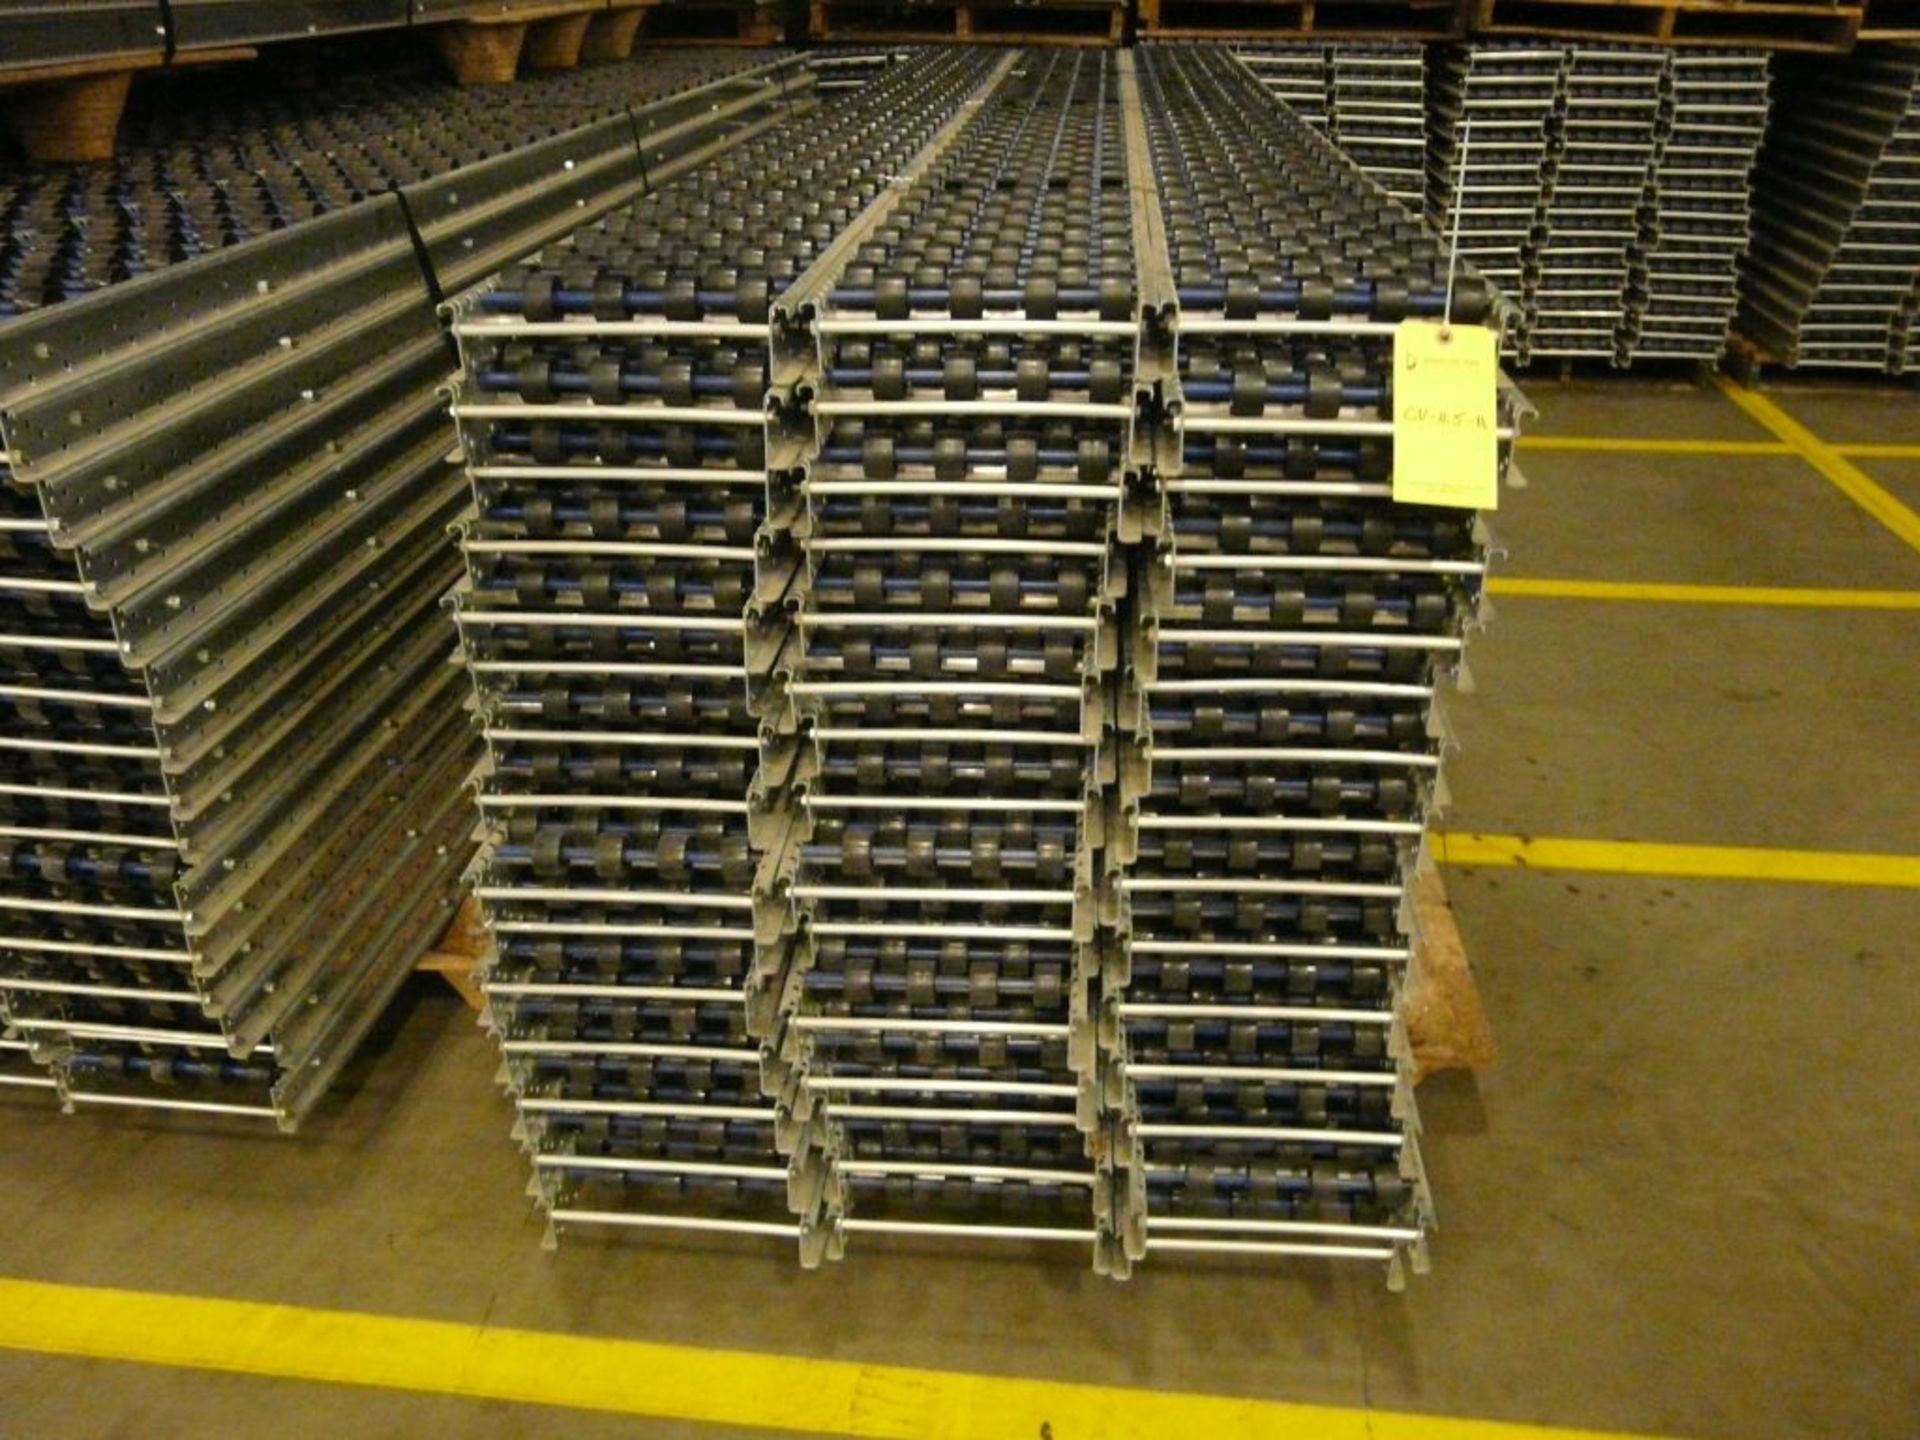 Lot of (90) SpanTrack Wheelbed Carton Flow Conveyors - 11.5'L x 11"W; Tag: 223574 - $30 Lot - Image 2 of 4